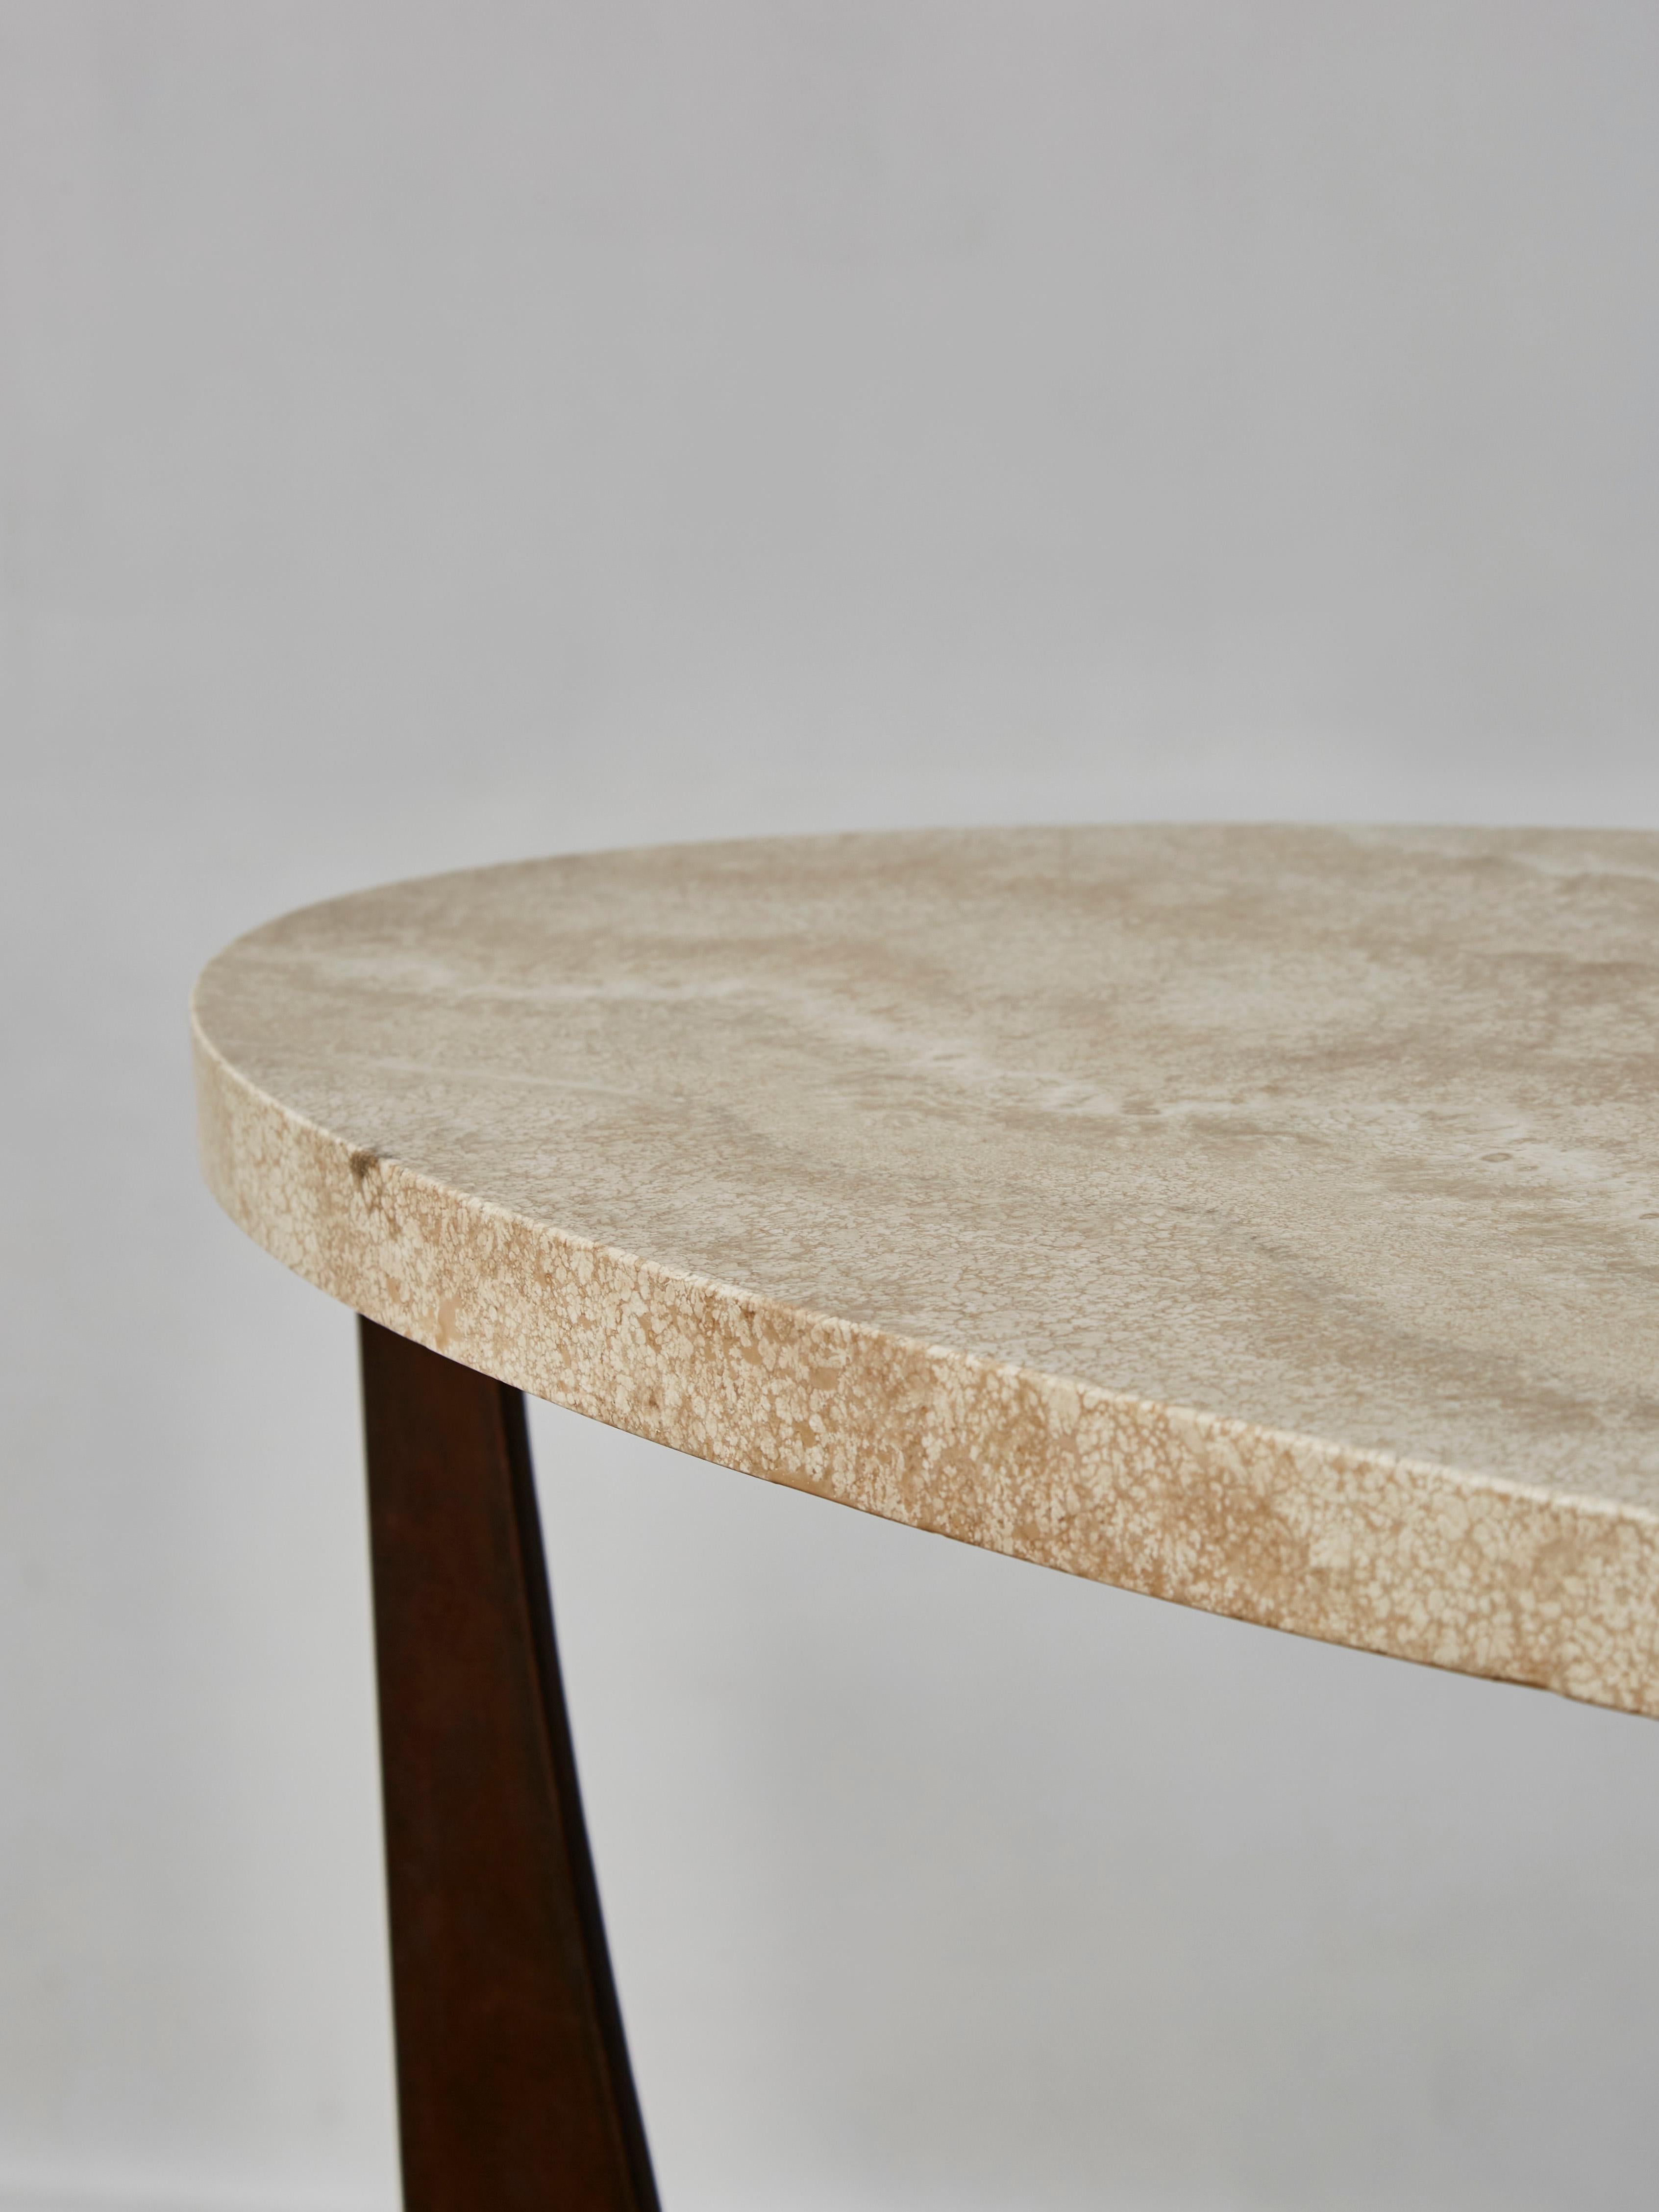 Elegant brutalist console in patinated steel and oval travertine stone top.
Creation by Studio Glustin.
Pair available.